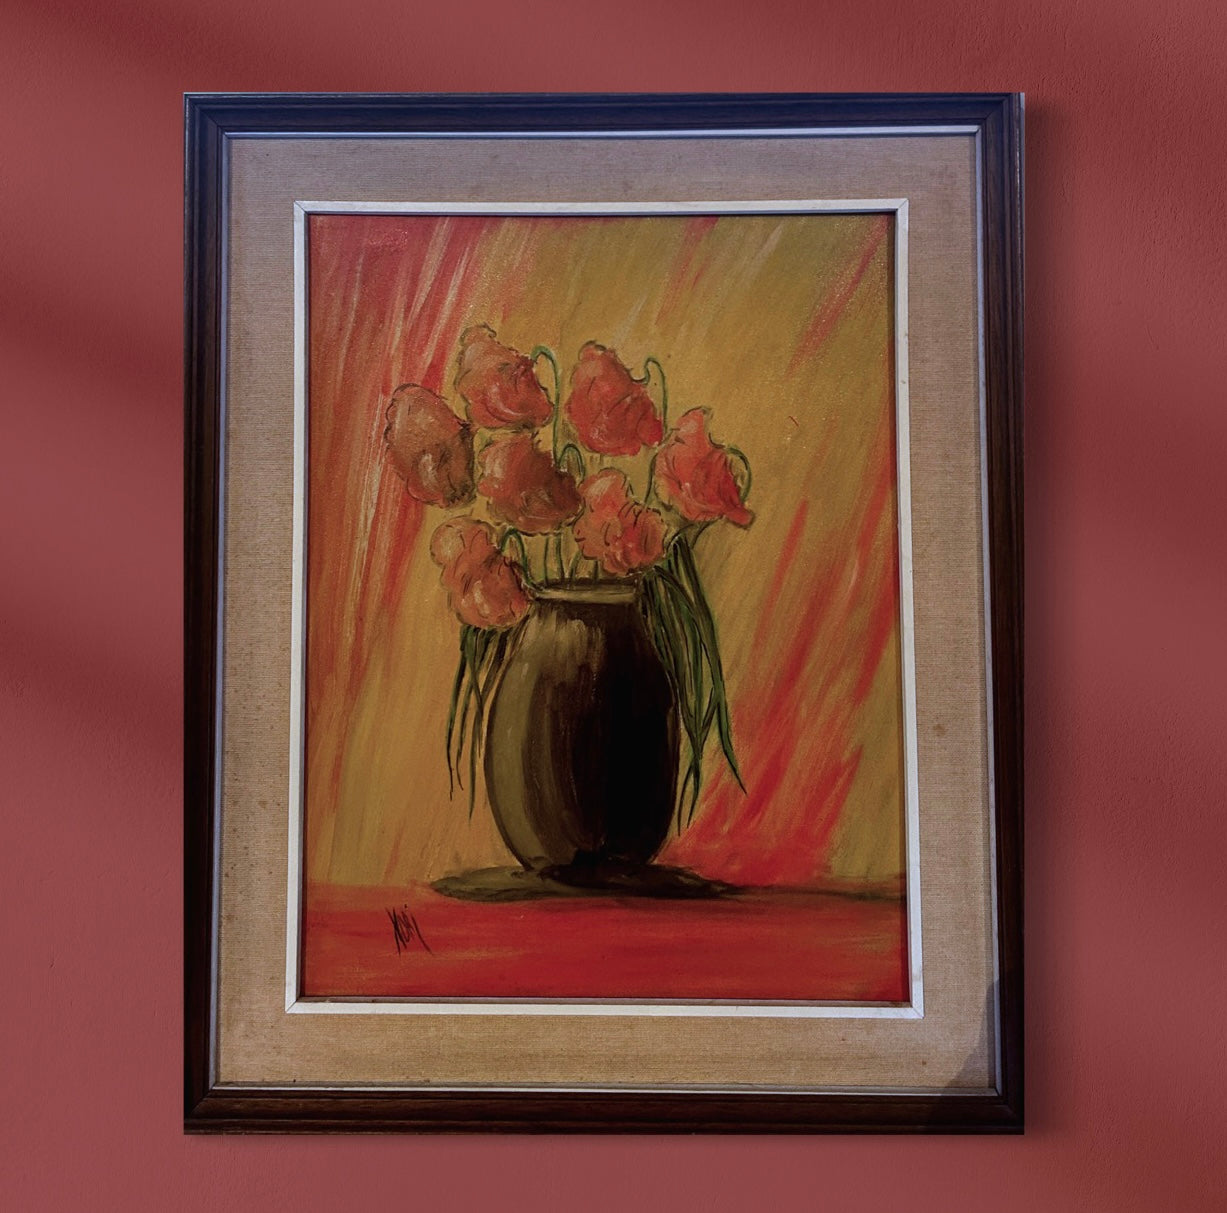 A Cheerful Mid Century Modern Still Life of Red Poppies